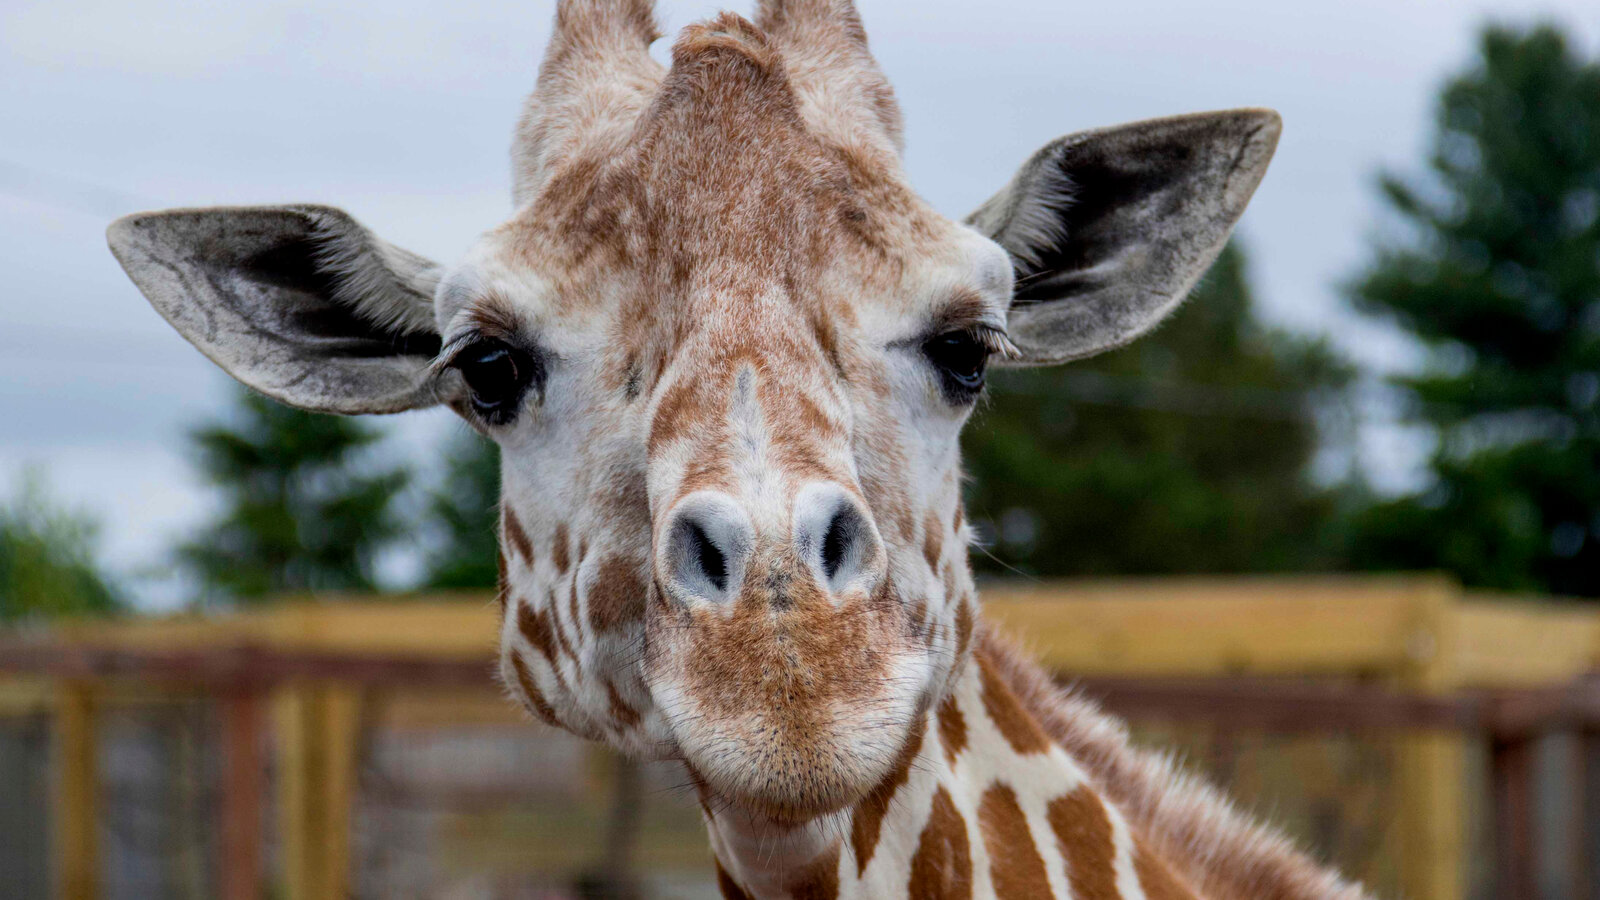 April the Giraffe, Who Became an Internet Sensation in Dies